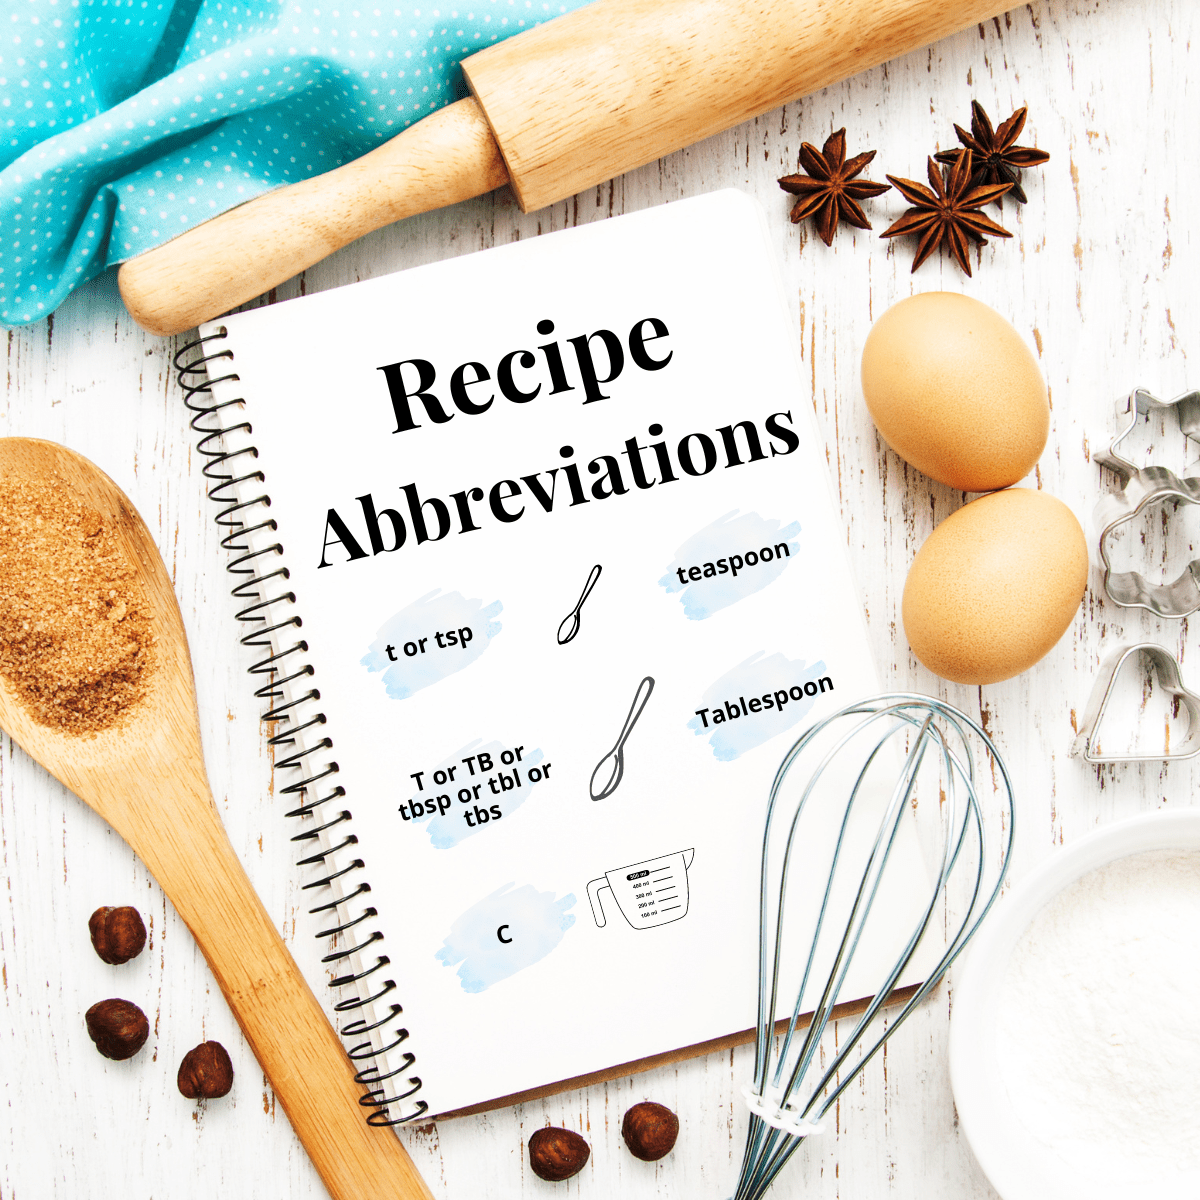 Rolling pin, whisk, and eggs surrounding a notebook with text reading "recipe abbreviations".